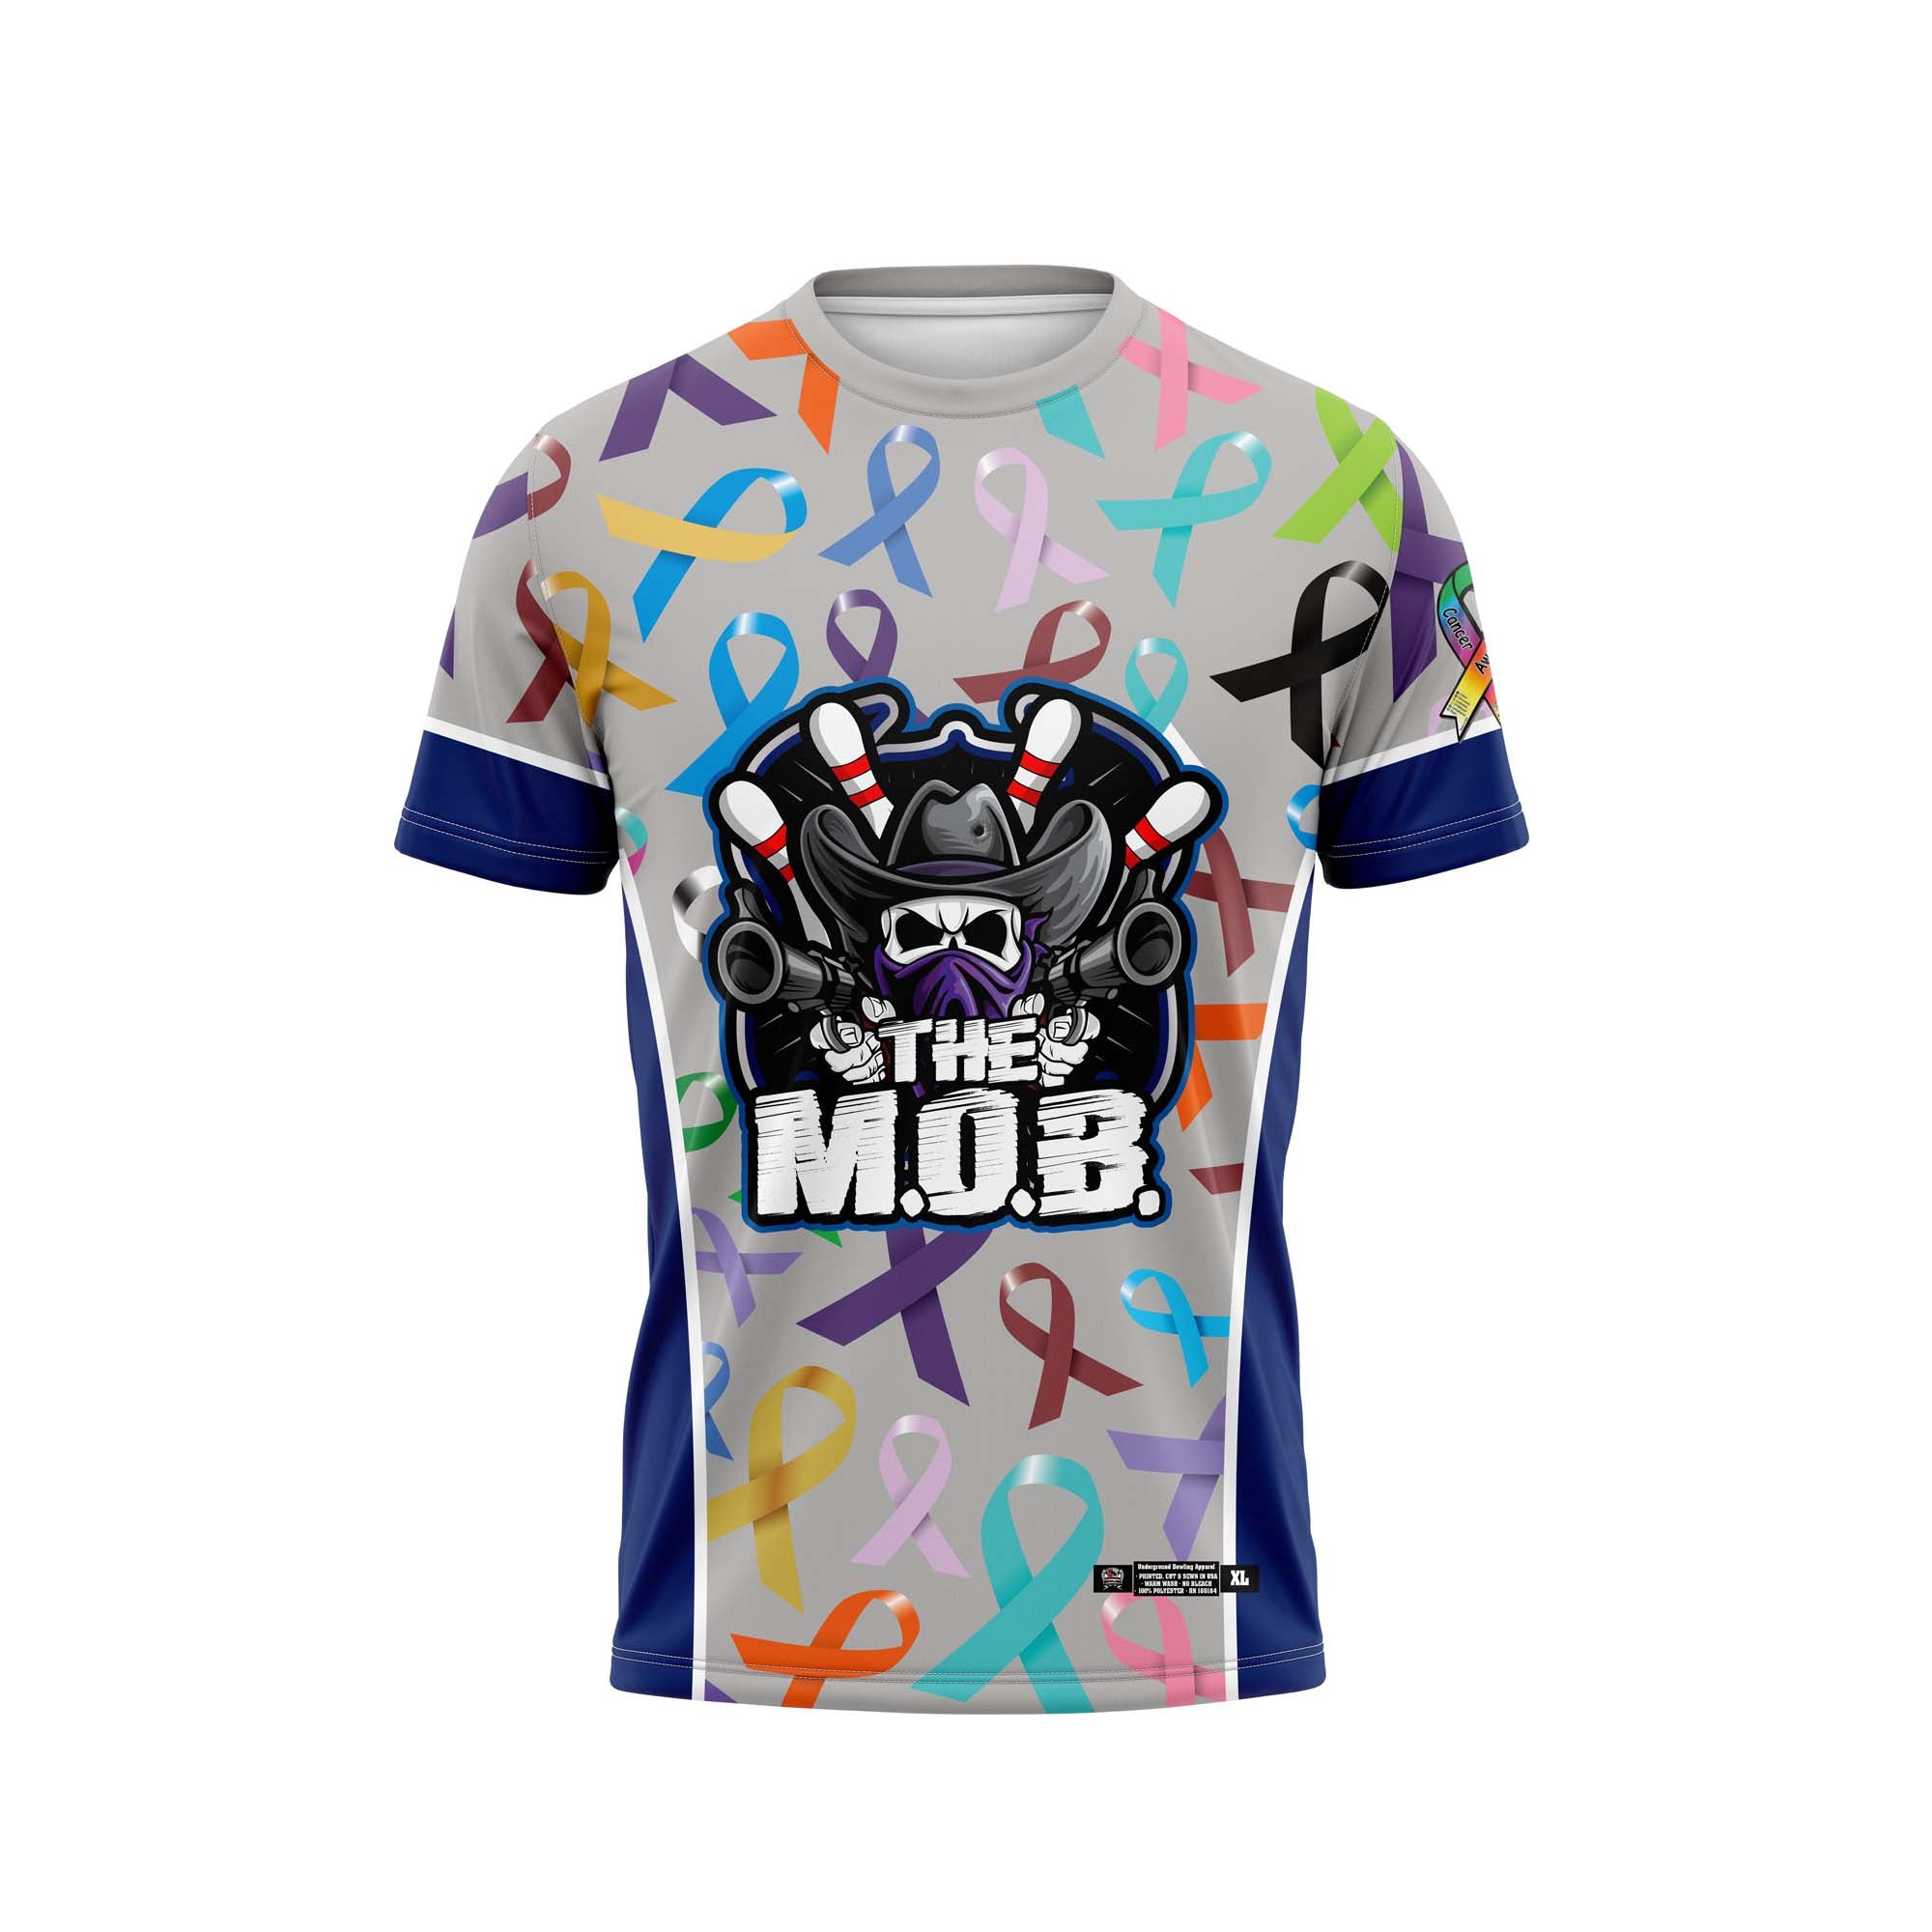 The MOB All Cancer Grey Jersey